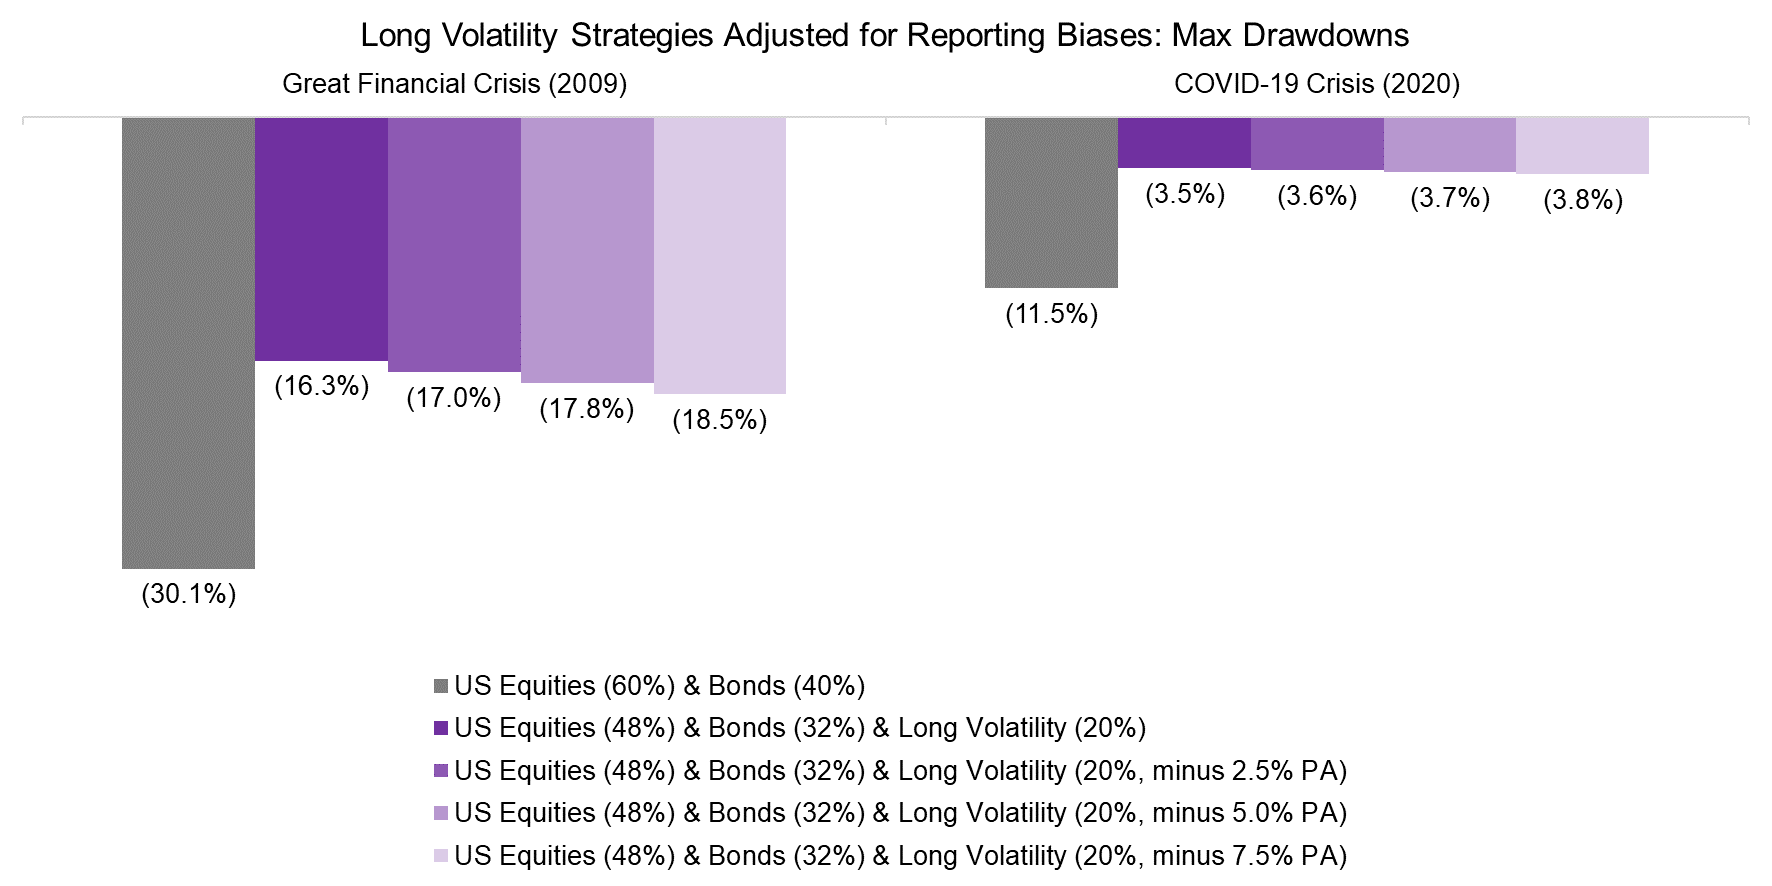 Long Volatility Strategies Adjusted for Reporting Biases Max Drawdowns